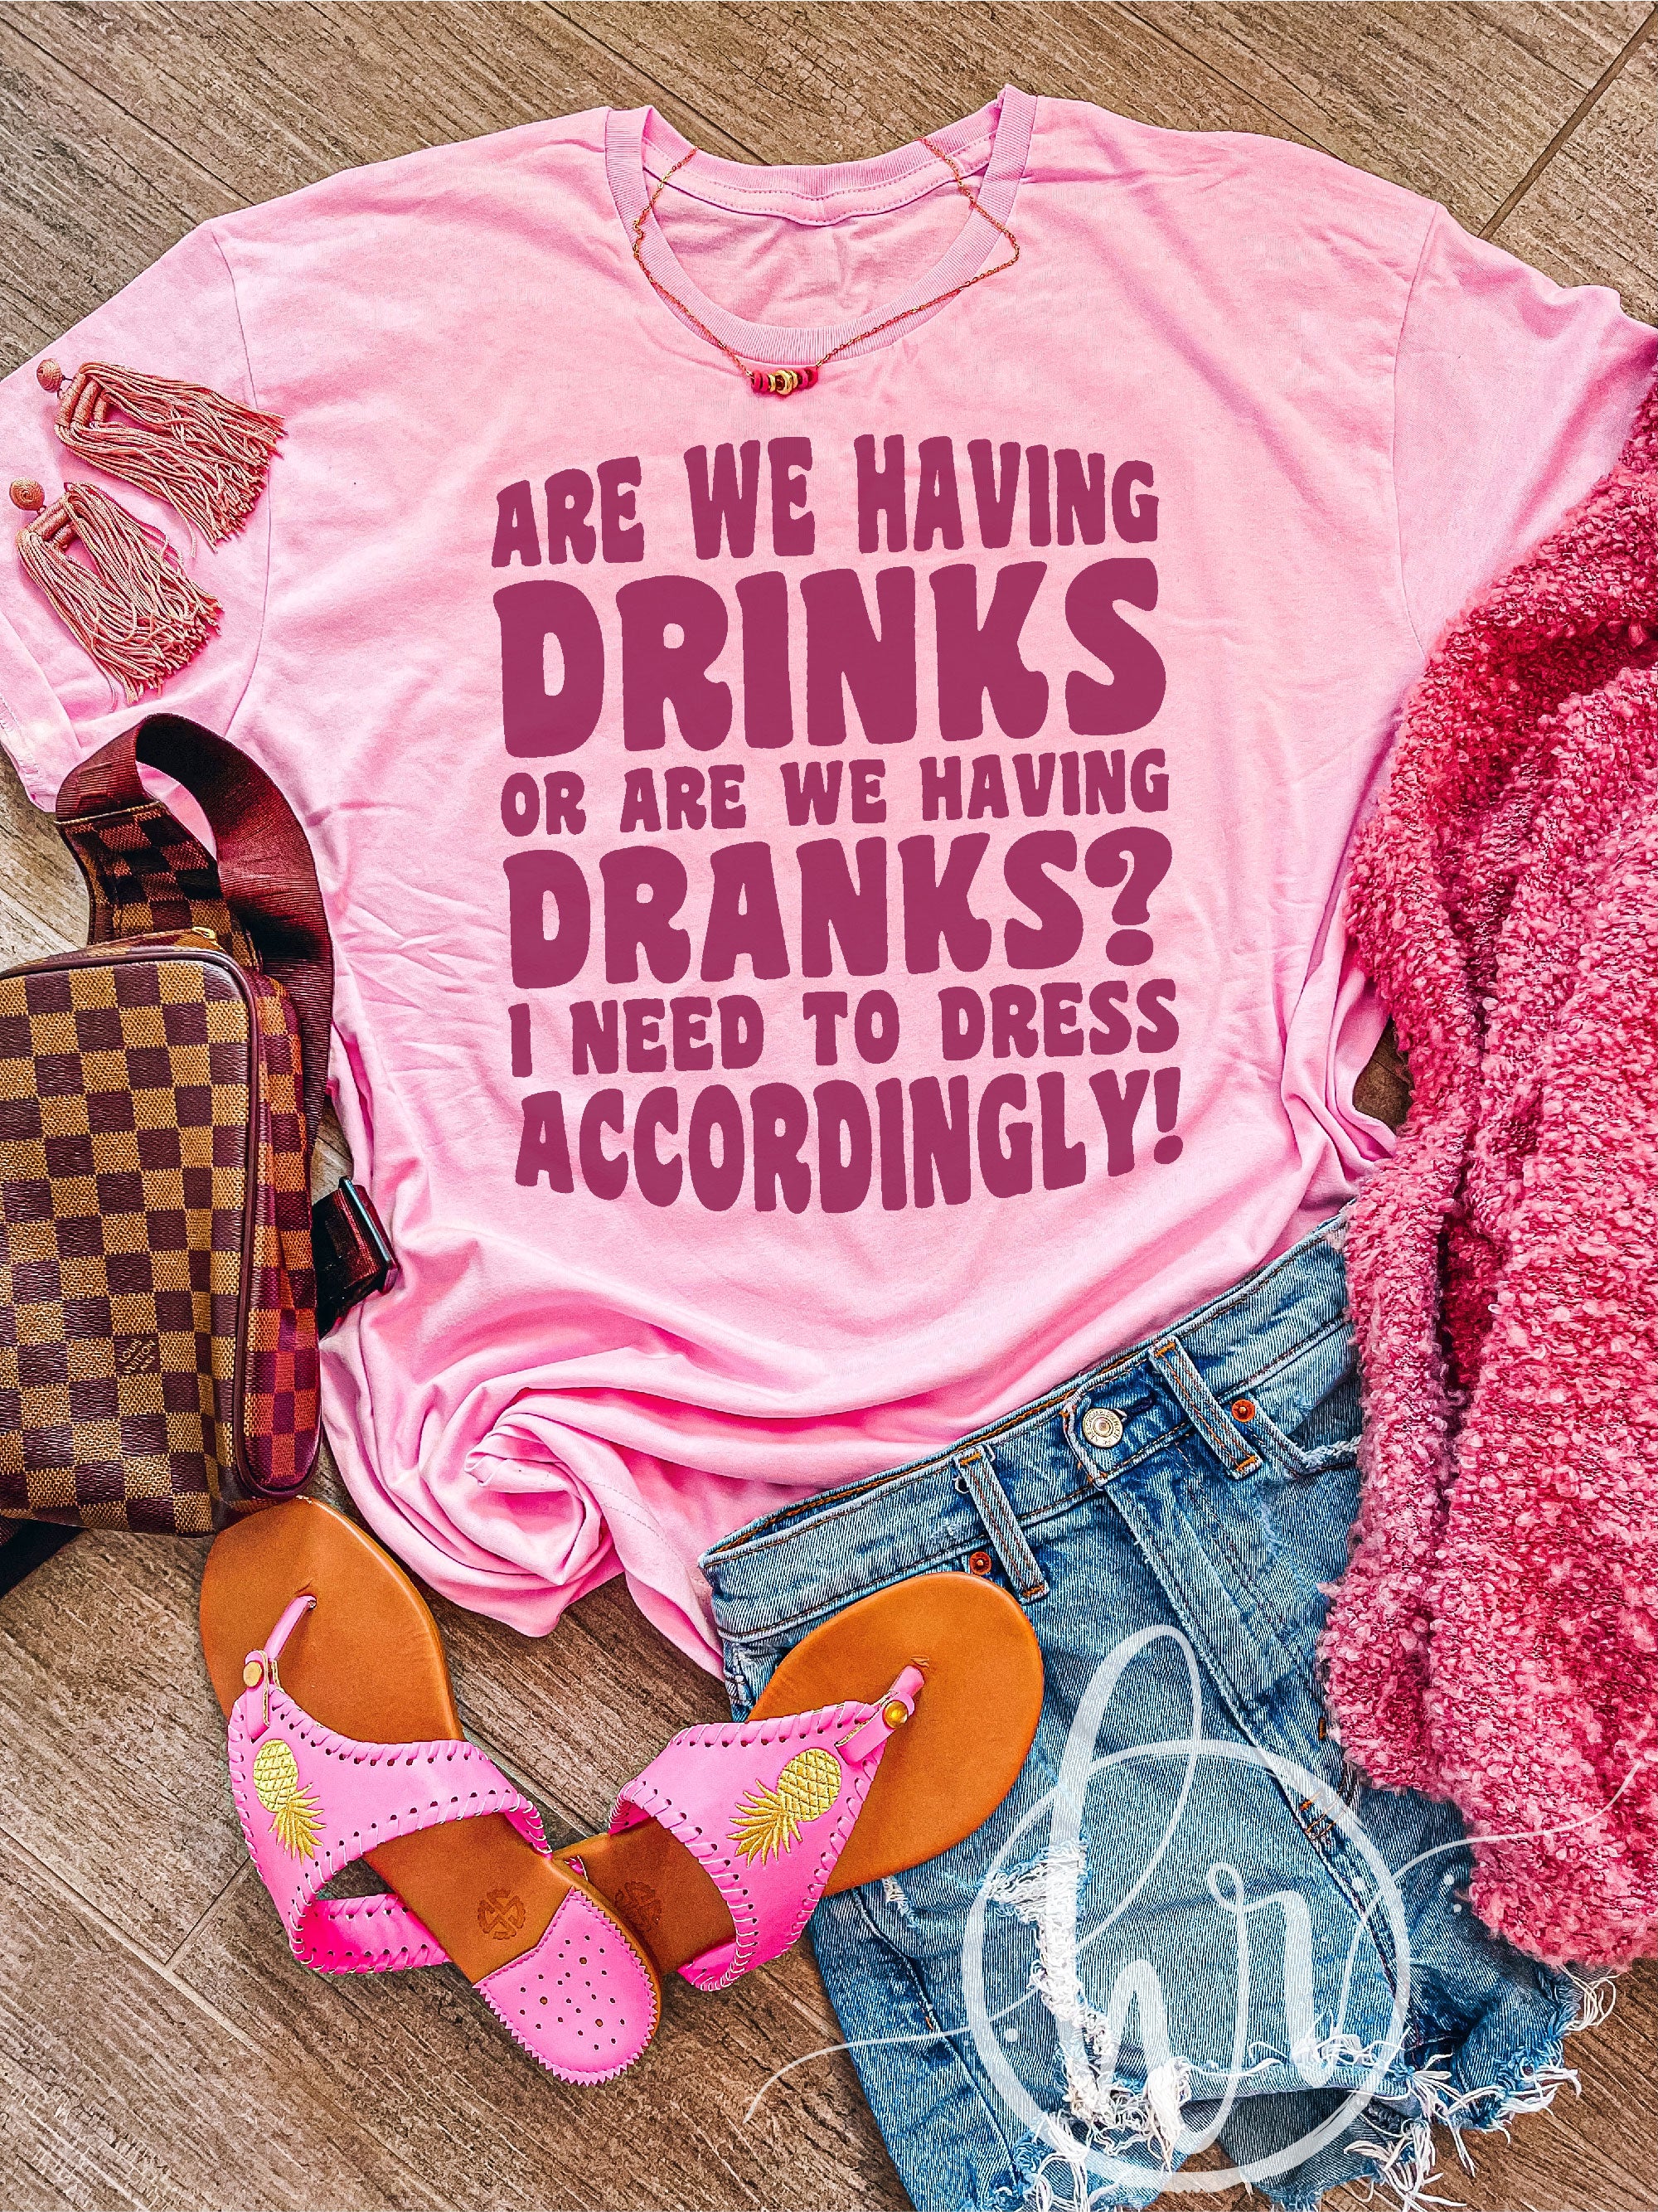 Are We Having Drinks or Are We Having Dranks? I Need to Dress Accordingly! T-Shirt - Baby Pink / XX-Large